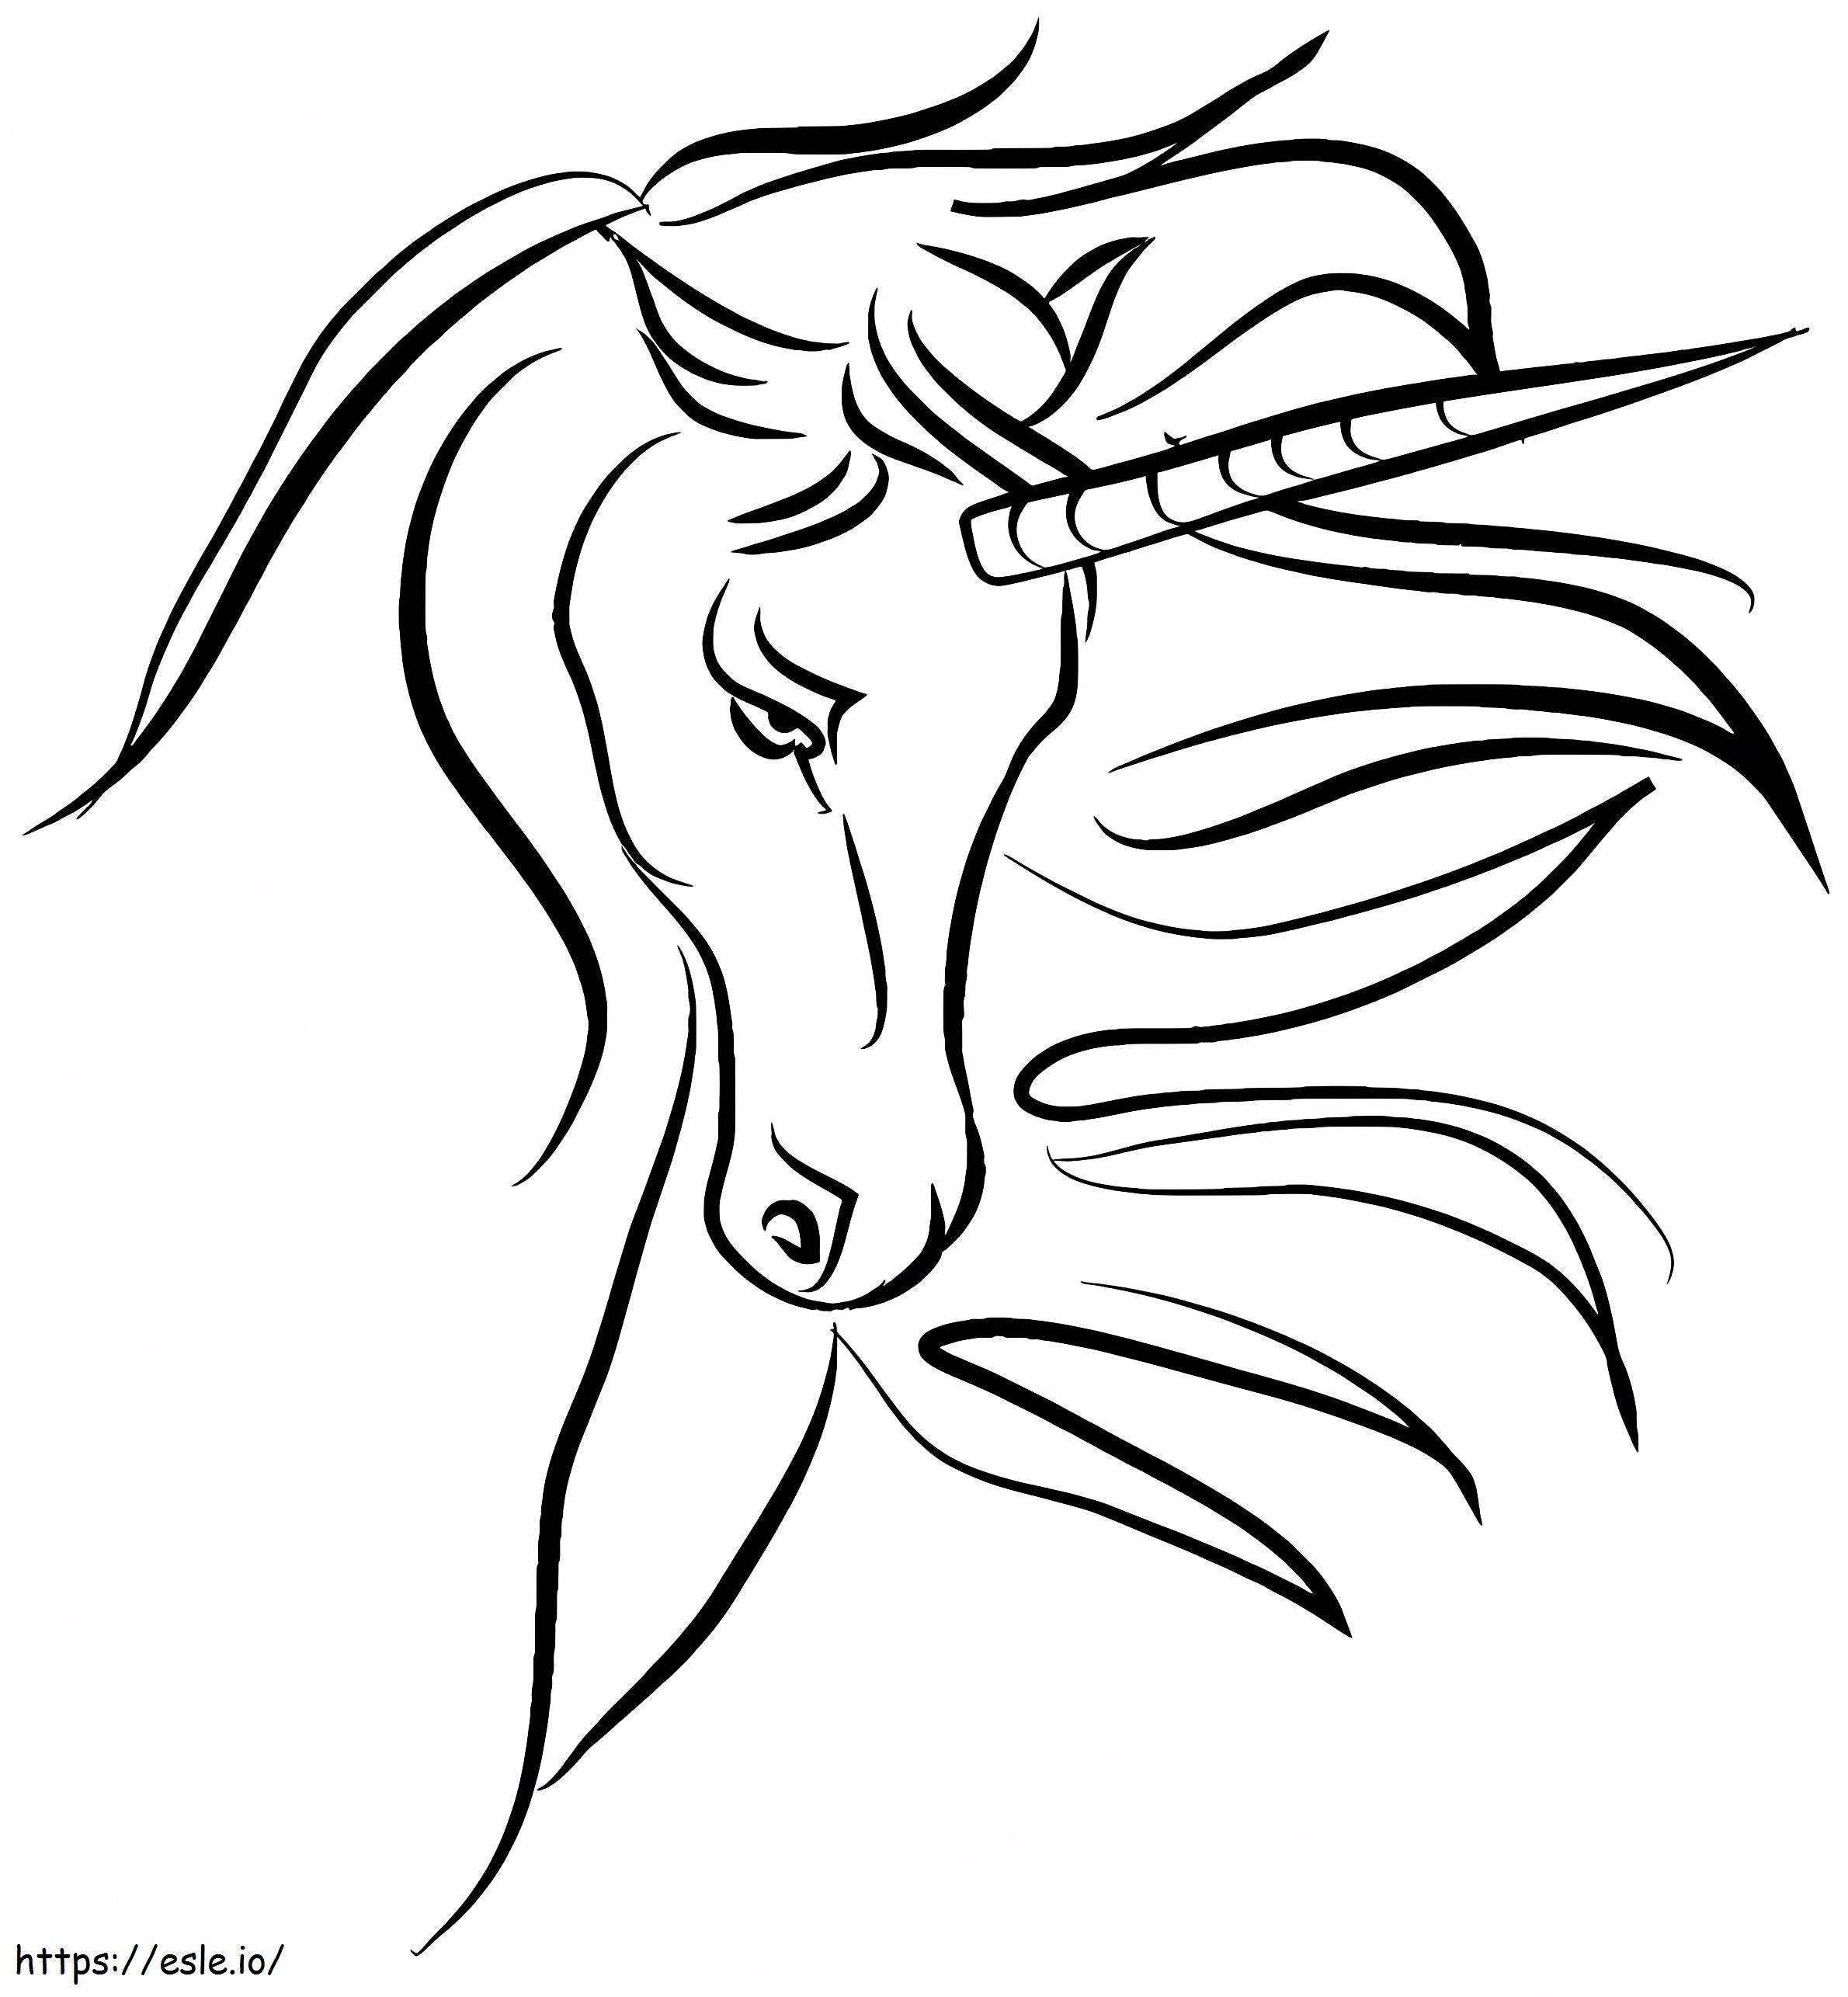 1560499402 Face Of Unicorn A4 coloring page